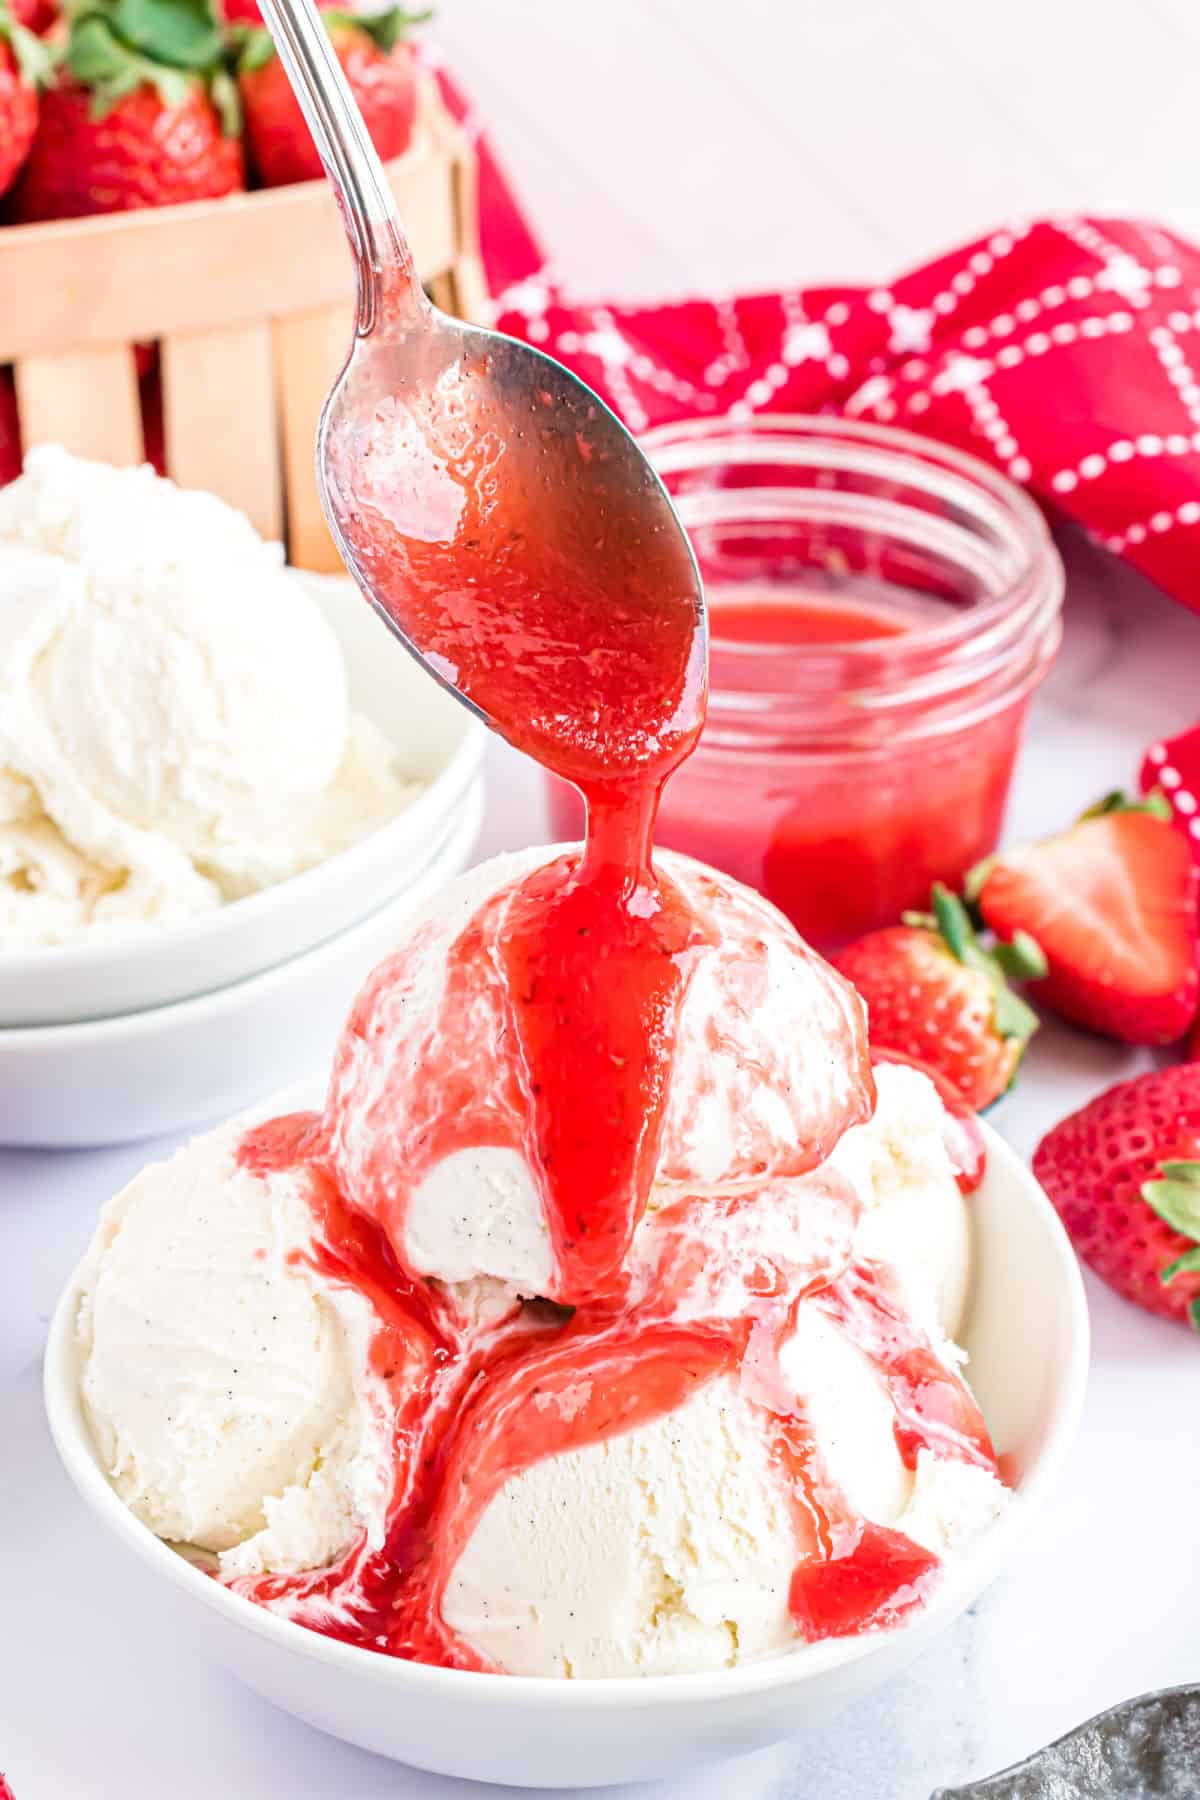 Vanilla ice cream topped with strawberry syrup.